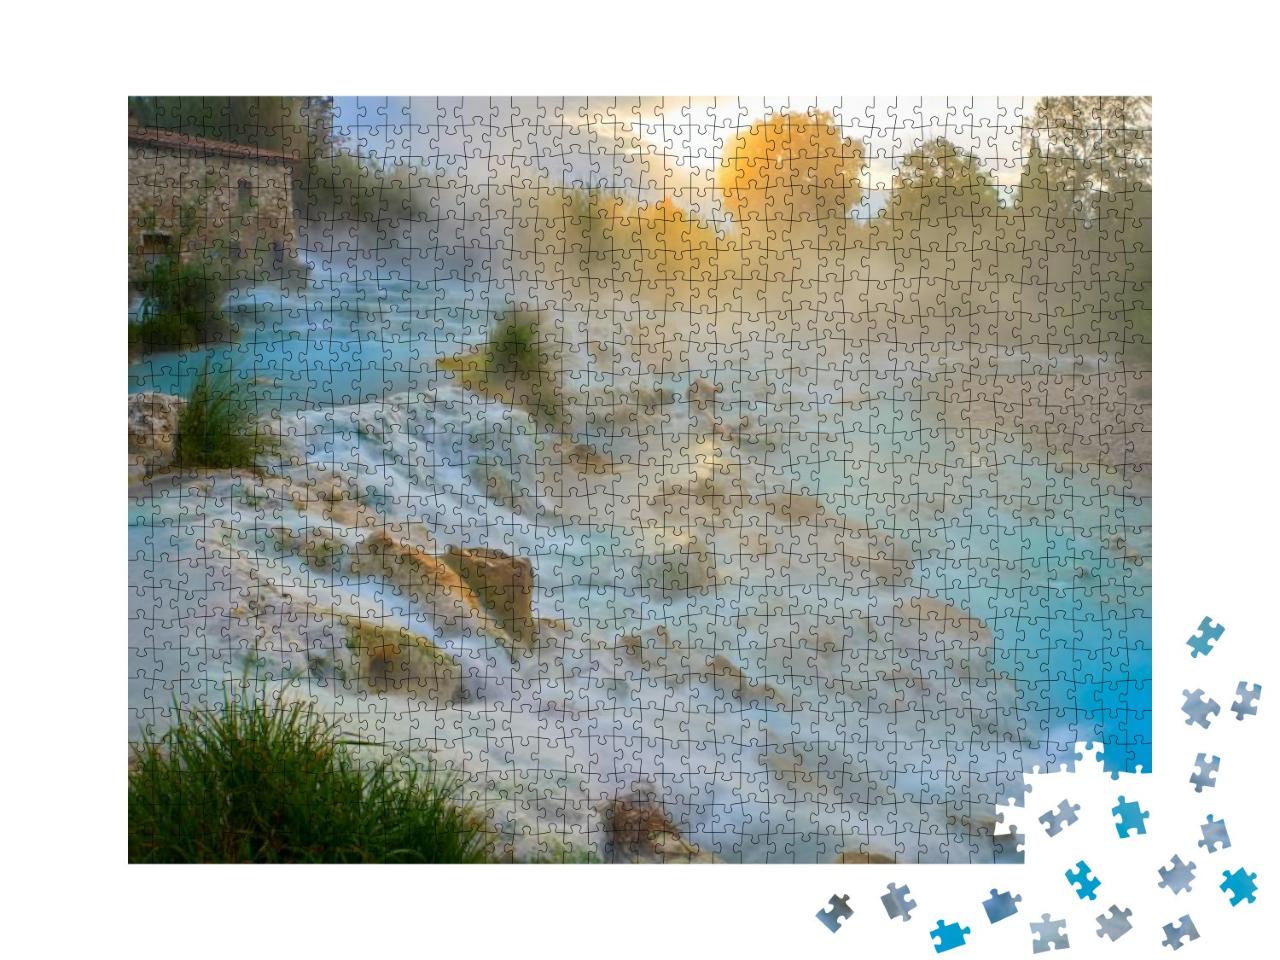 Natural Spa with Waterfalls & Hot Springs At Saturnia The... Jigsaw Puzzle with 1000 pieces